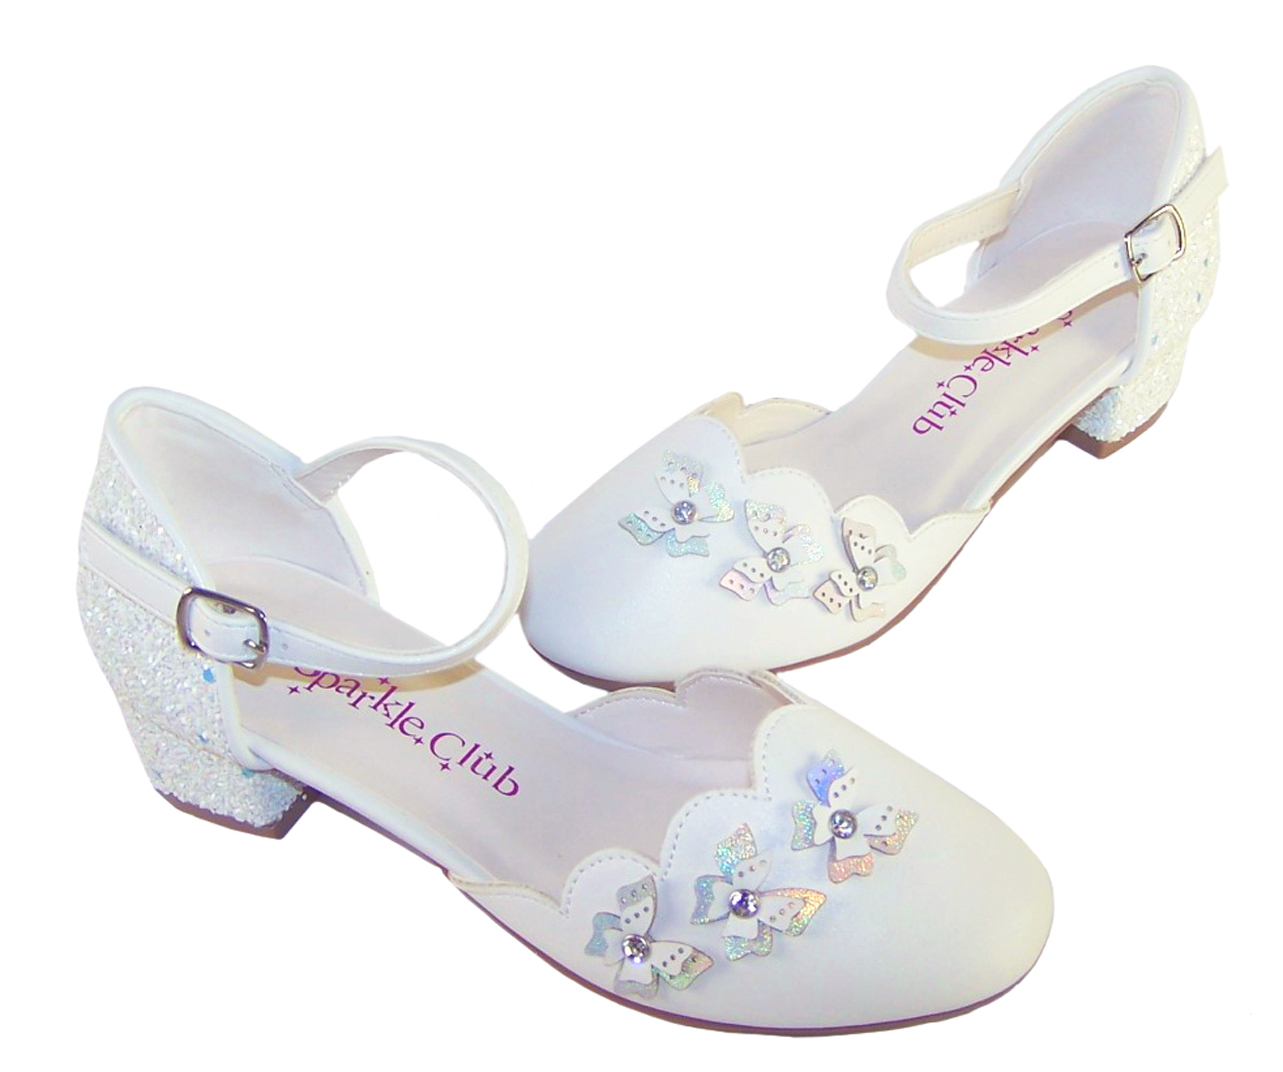 Girls white low heeled sparkly bridesmaid shoes and bag-6513